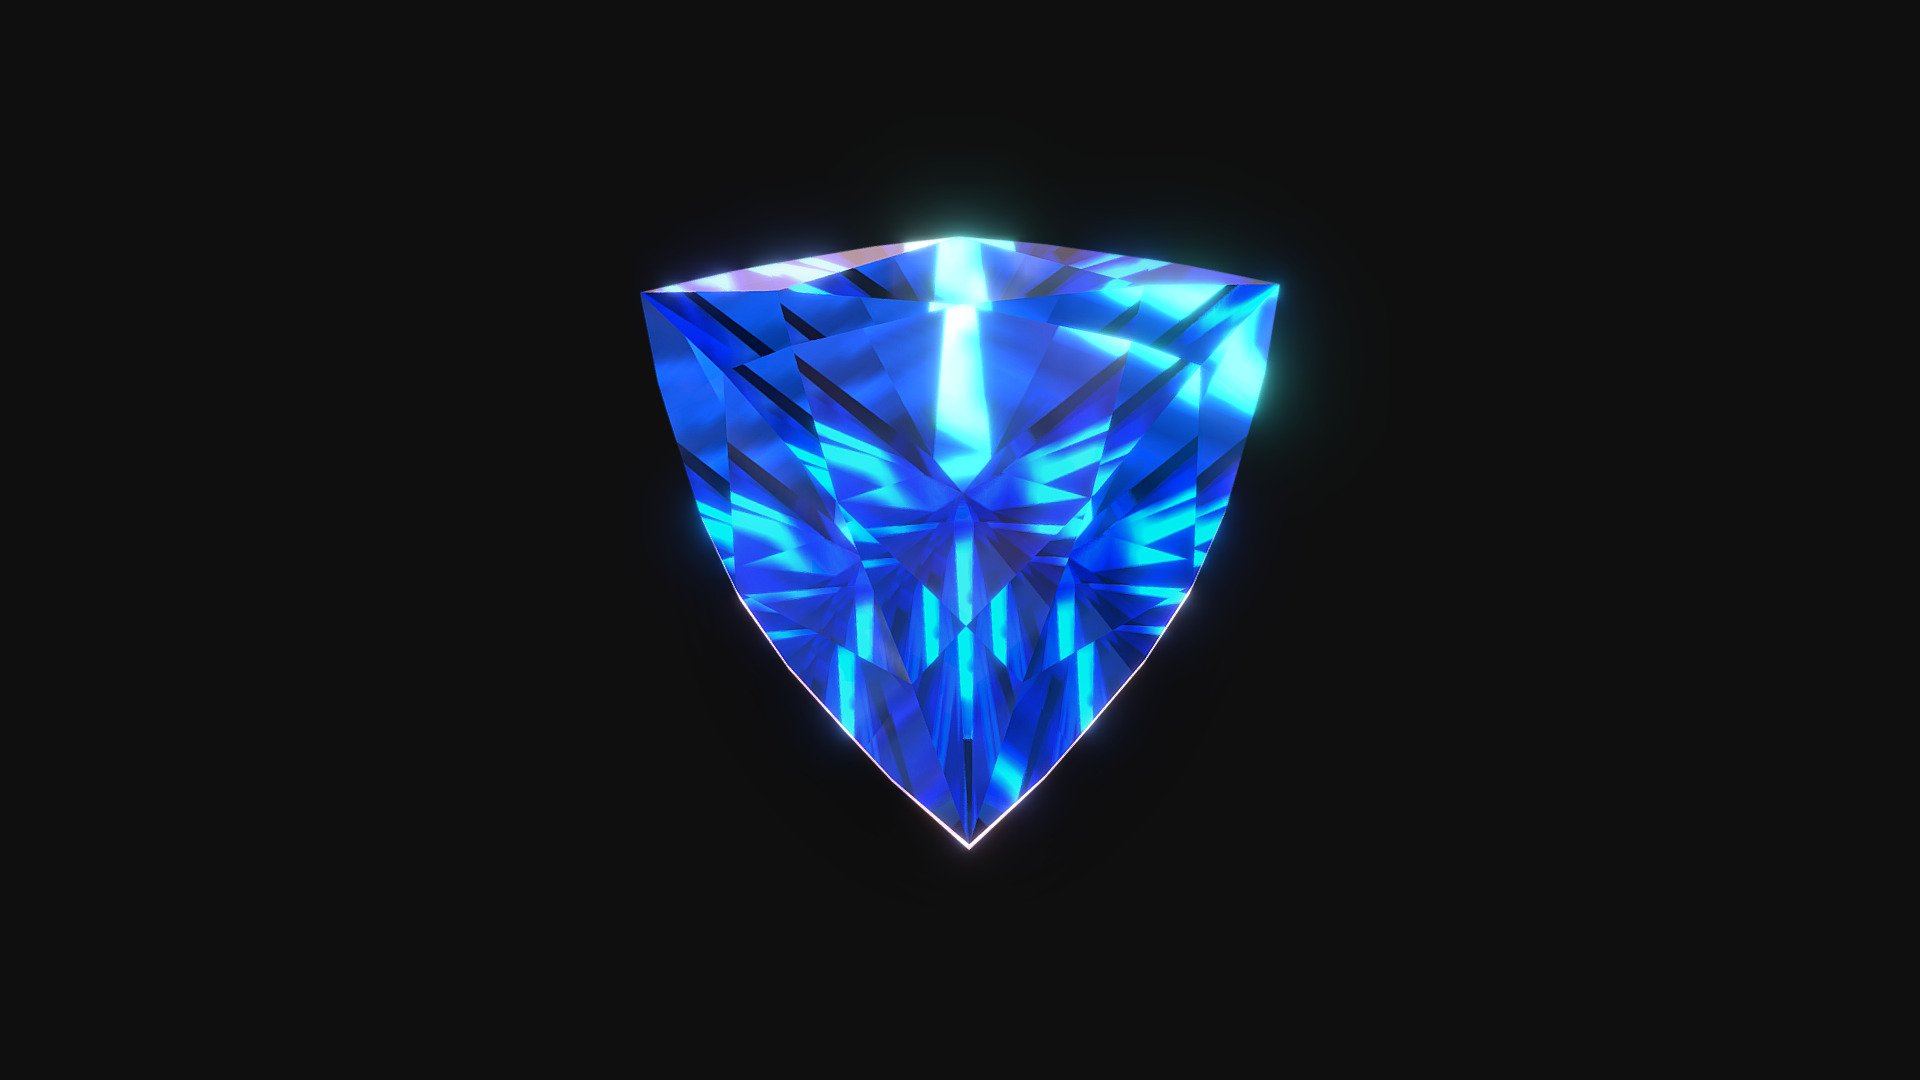 Curved trilliant/trillion cut sapphire. The intention with this short project was to create a 3D model of a faceted gemstone which exhibits a degree of translucency and internal refraction.

Model created with 3ds Max 3d model